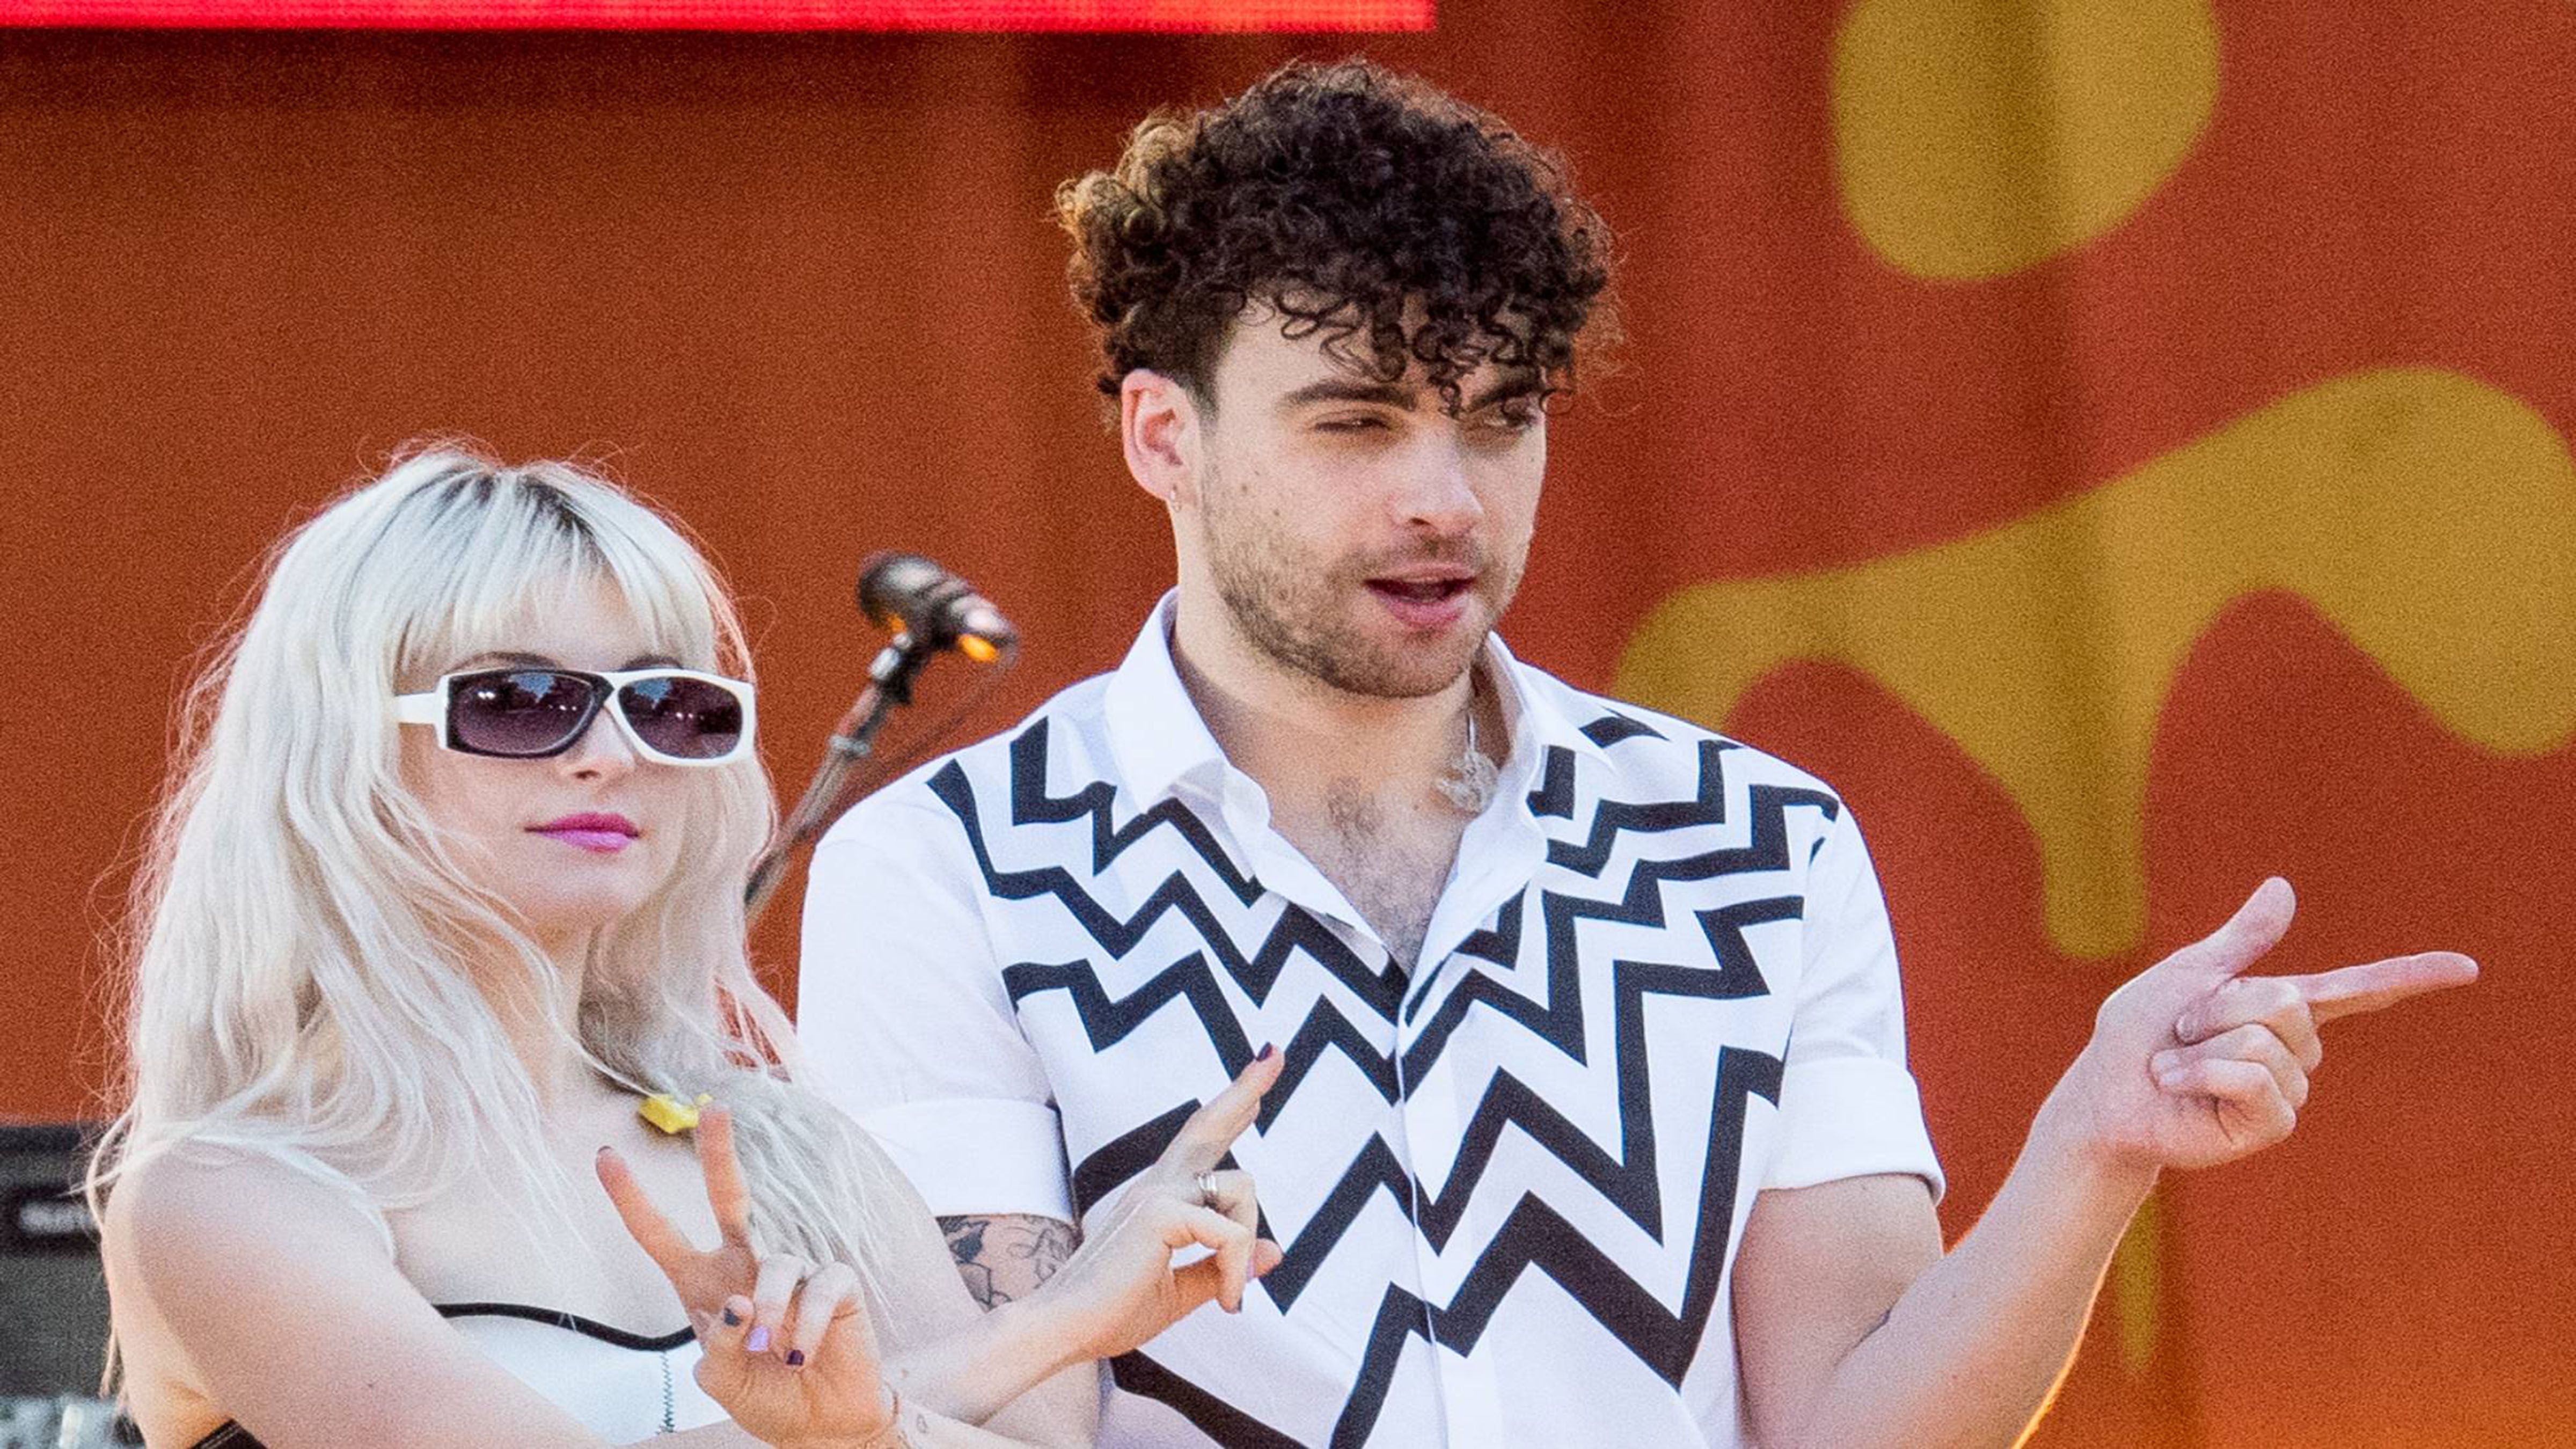 Paramore's Hayley Williams in a relationship with guitarist Taylor York